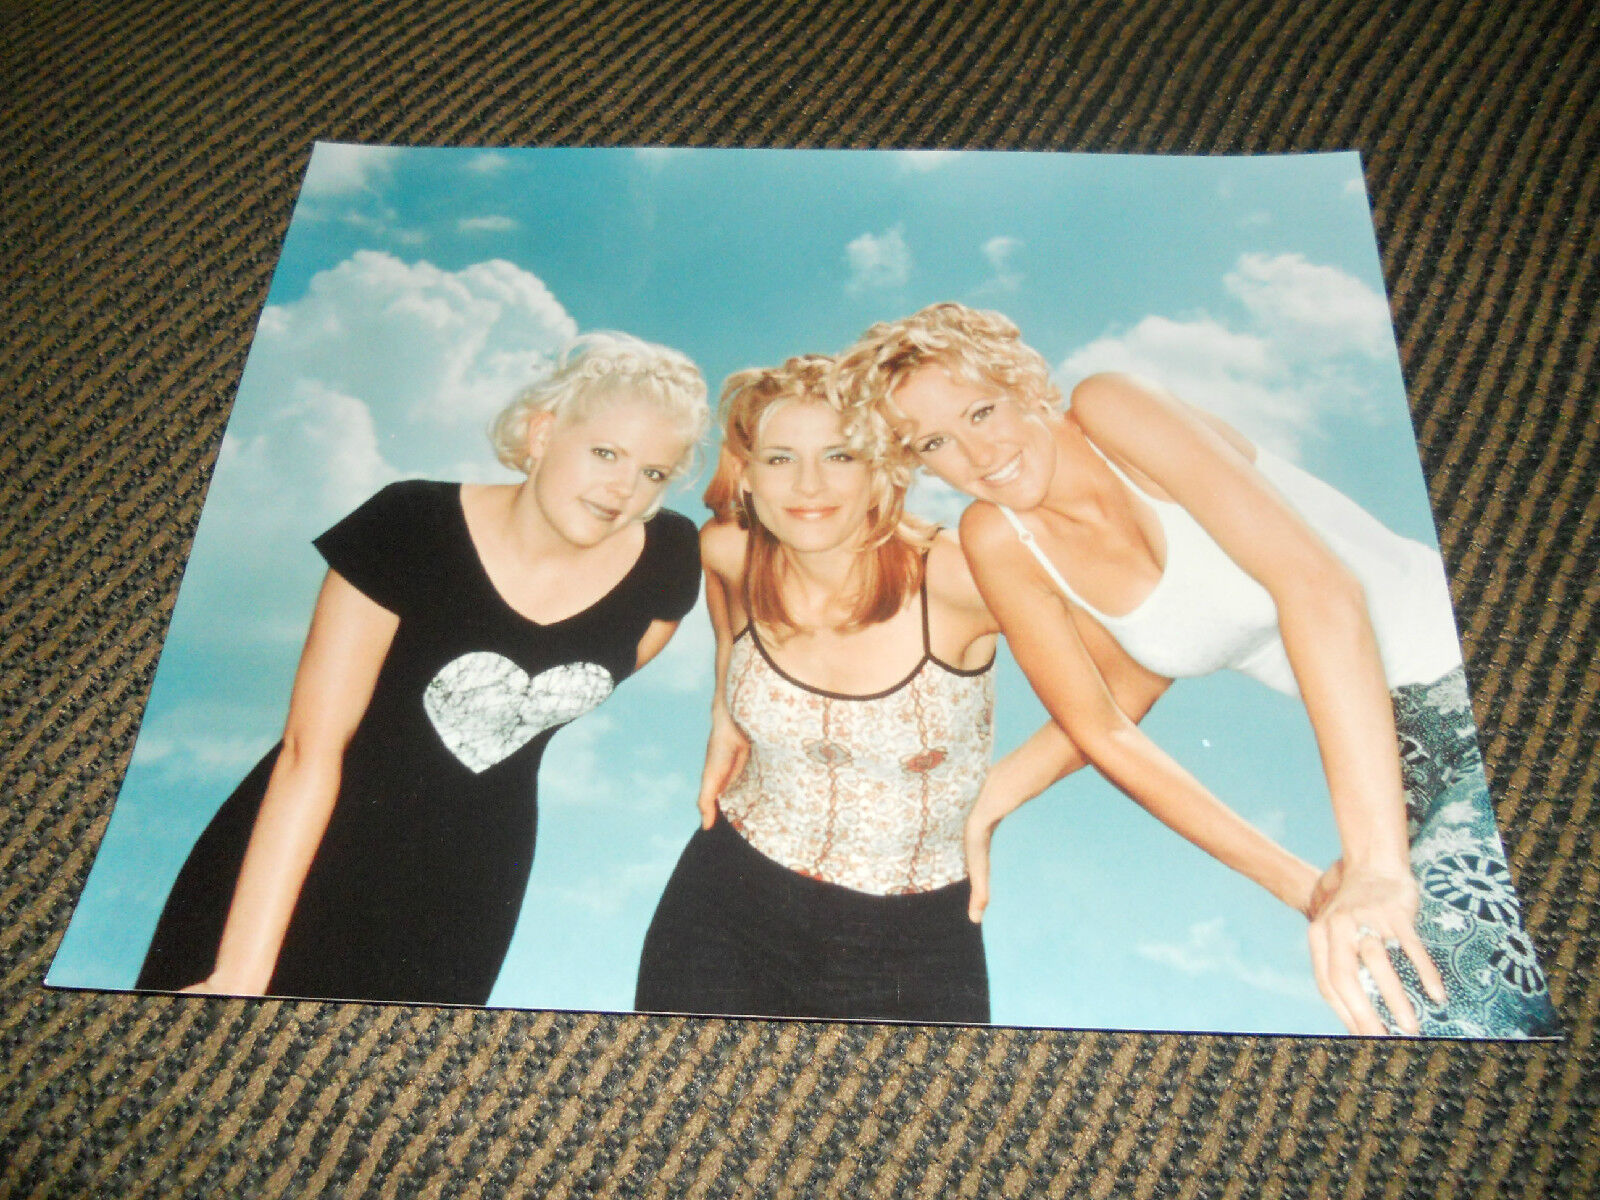 The Dixie Chicks Sexy Country Music Promo Color 8x10 Photo Poster painting #1